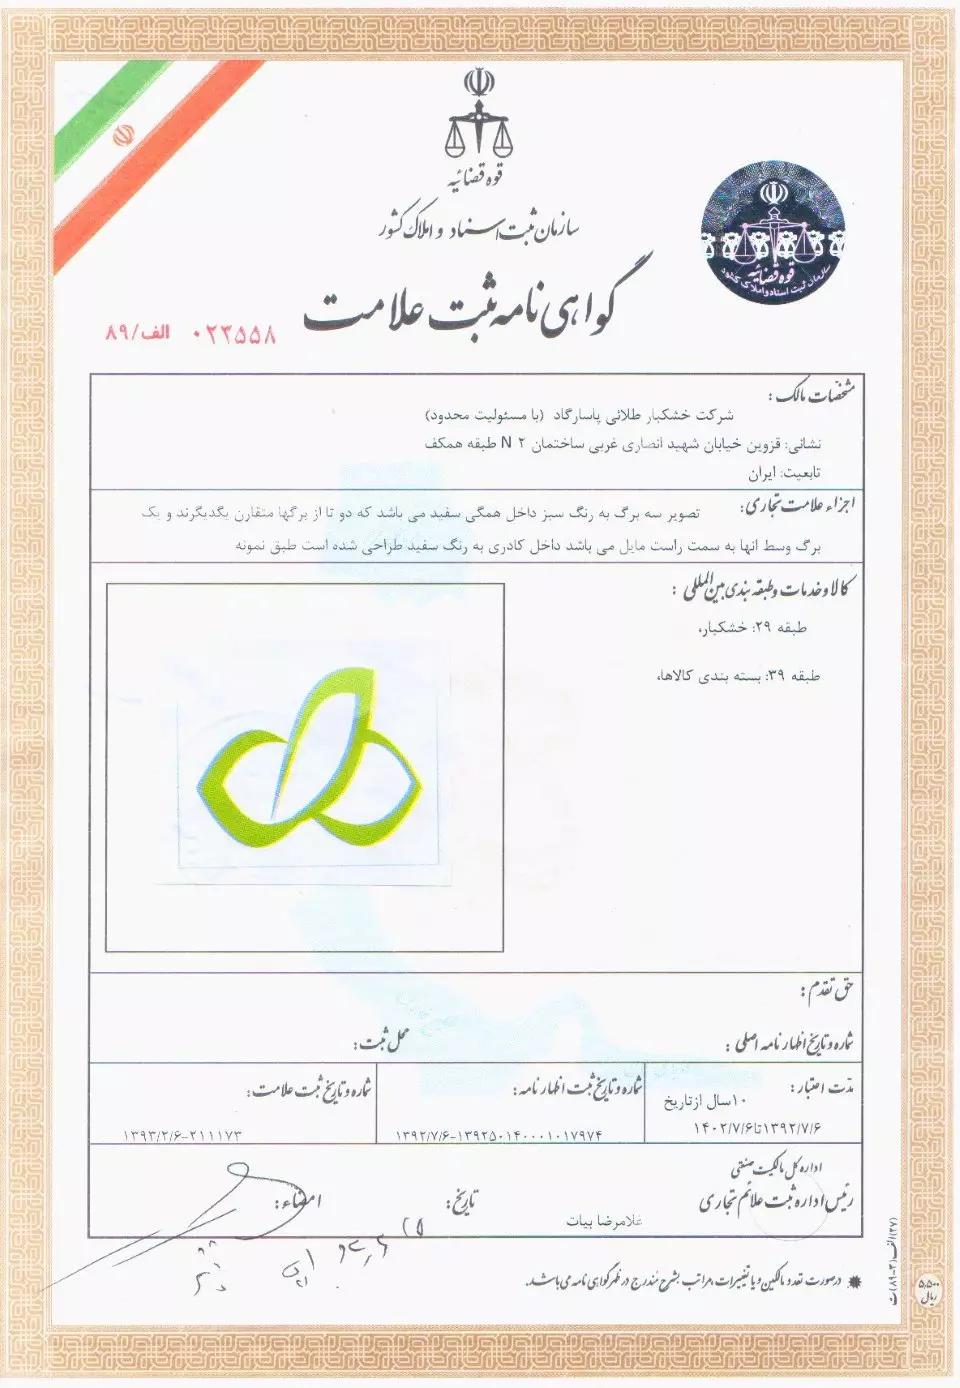 Certificate of registration of a mark from the State Property and Deeds Registration Organization